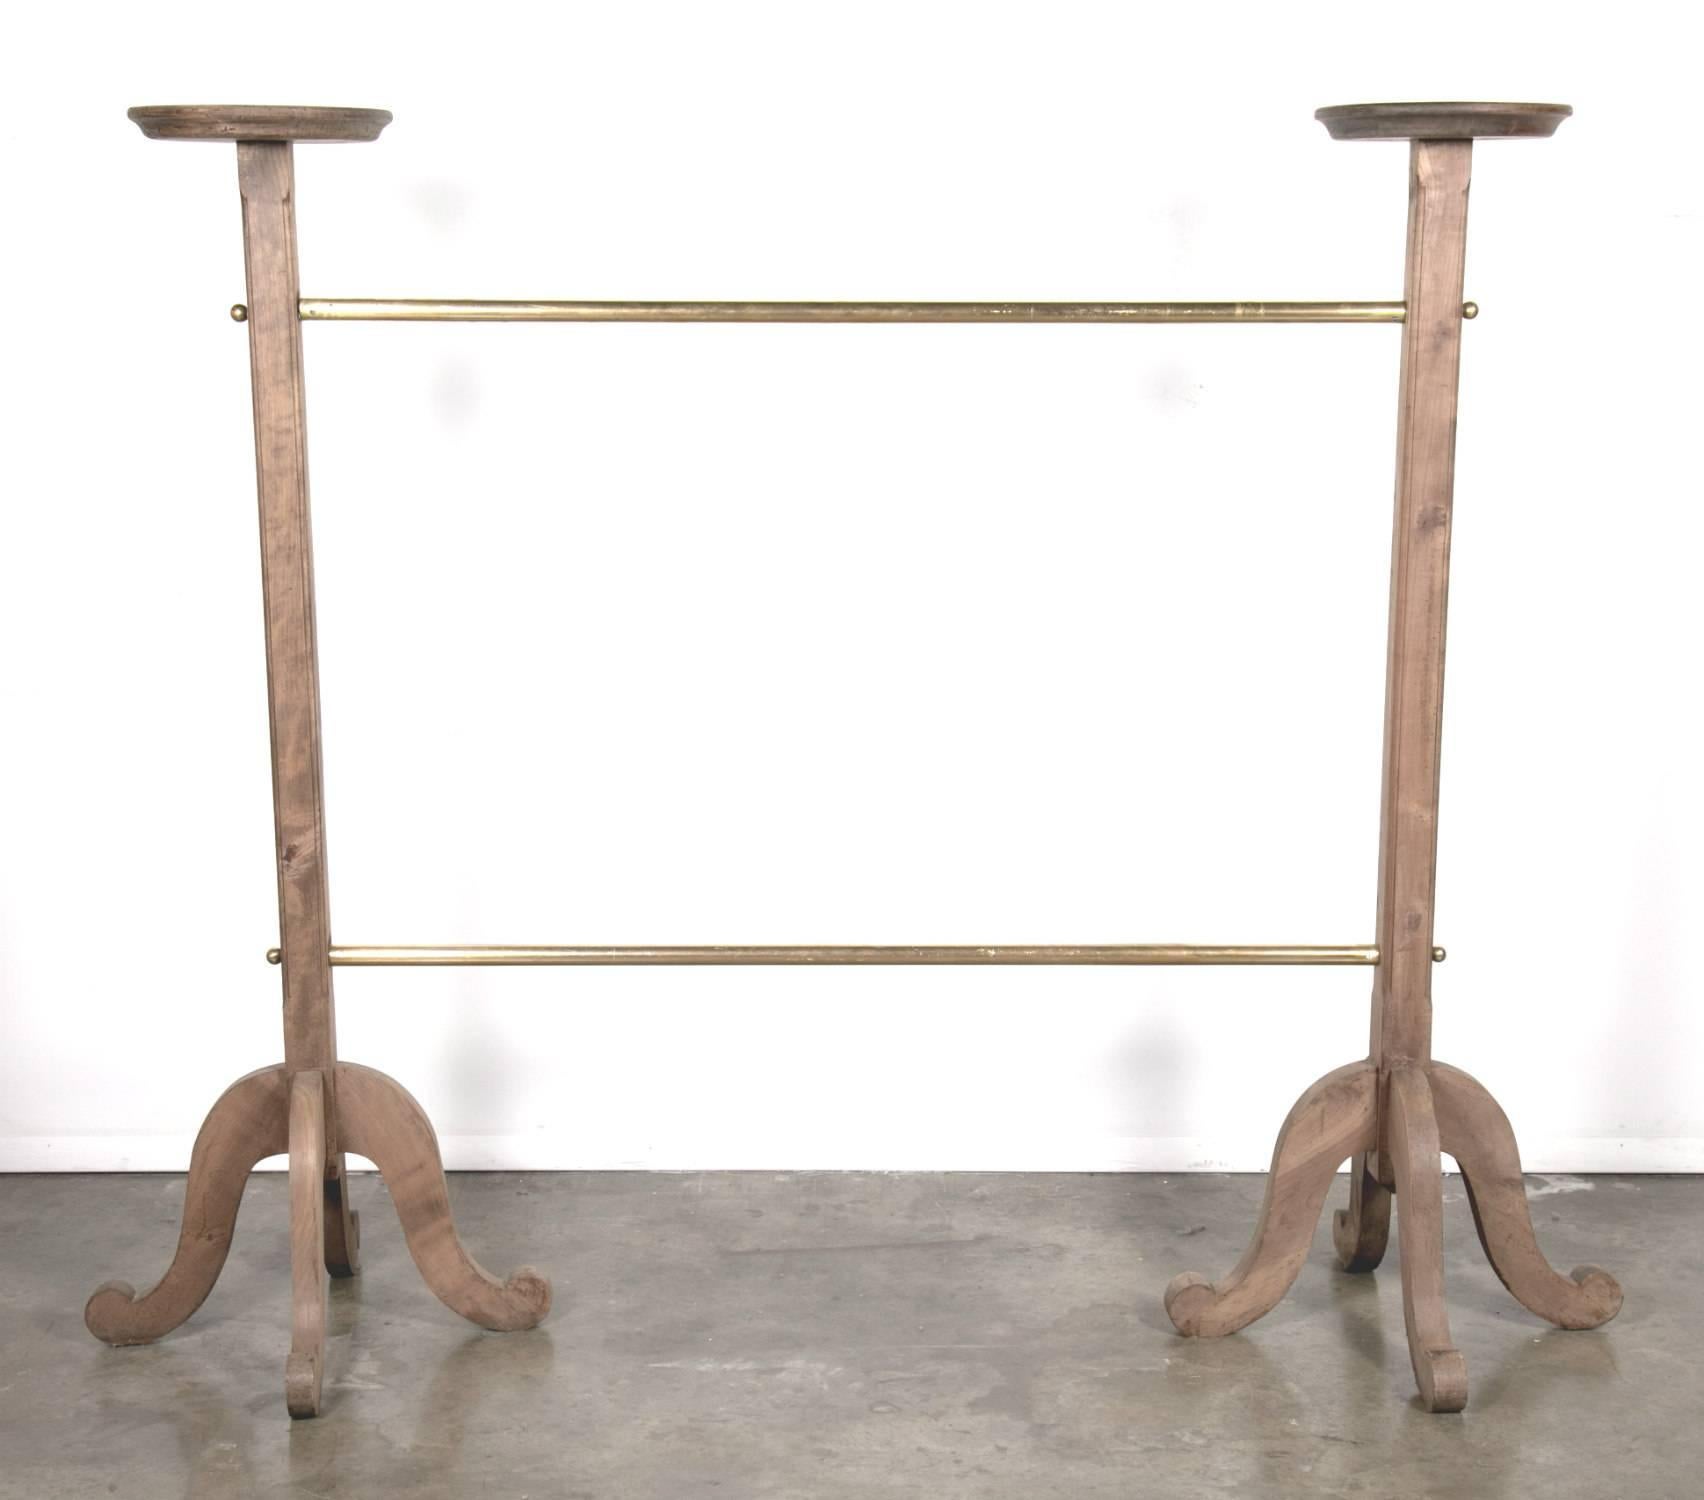 Fabulous and sophisticated 1930s two-tier polished old French brass garment rack, featuring bleached oak pedestal column bases from the famous French department store chain Galeries Lafayette in Paris. Clothing racks like these are a very rare